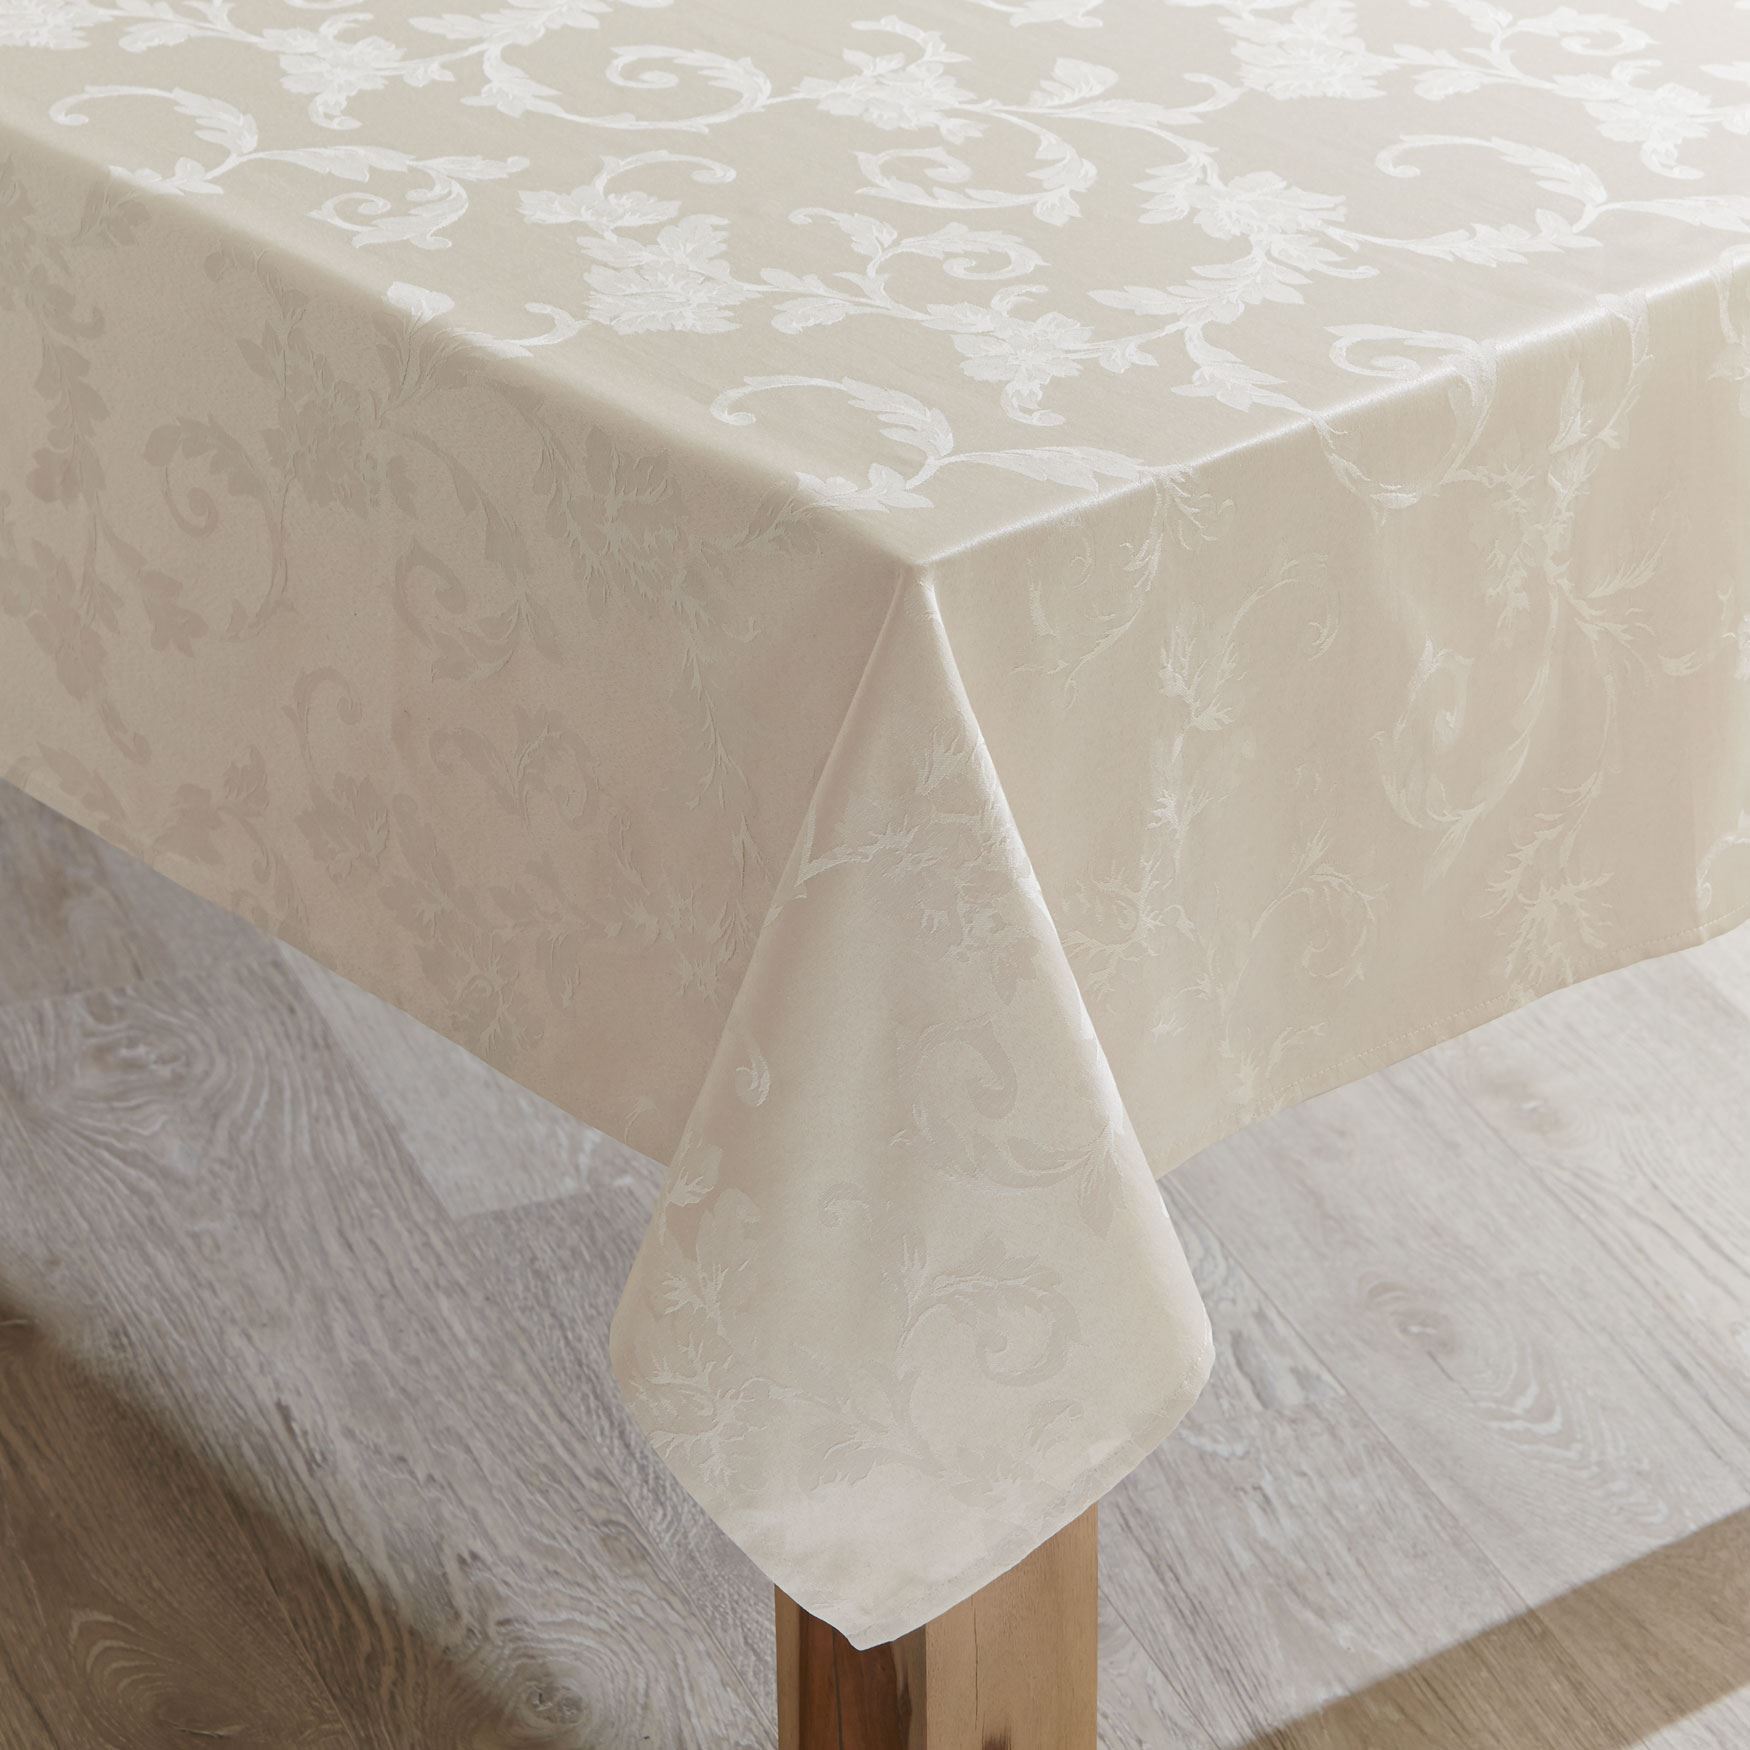 Grand Luxe Tablecloth Collection | Brylane Home